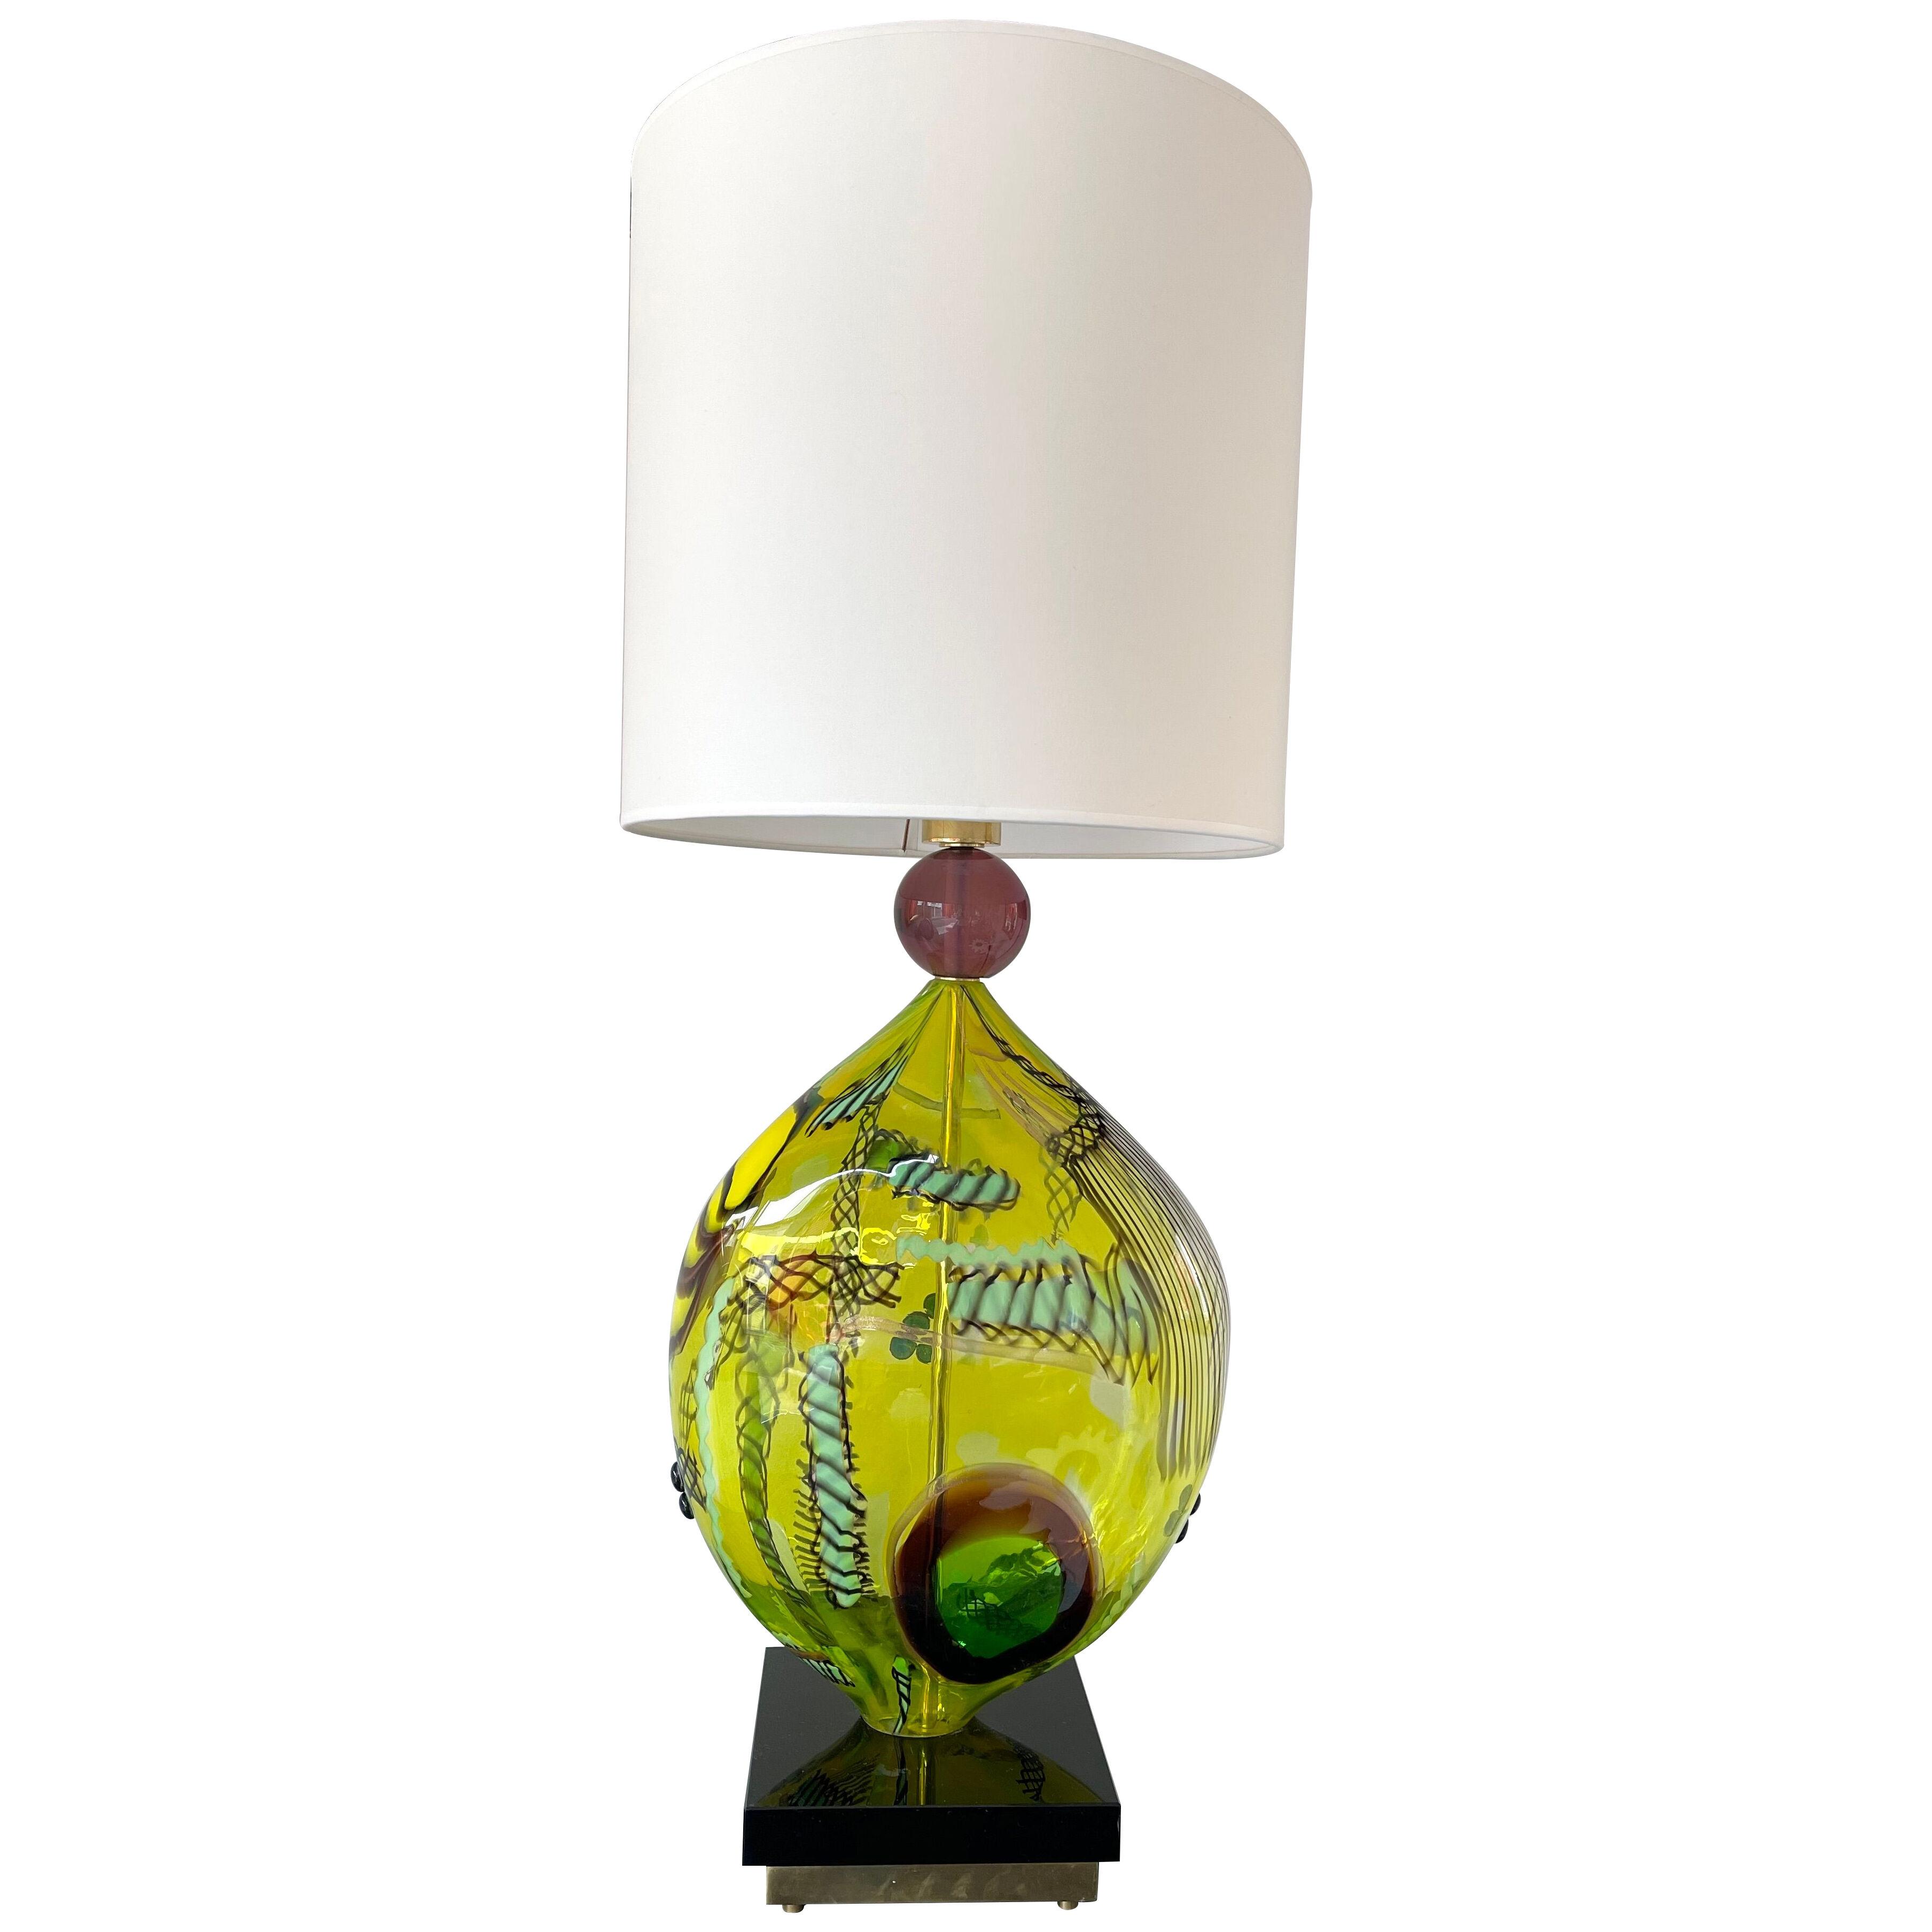 Large Contemporary Murano Glass Bottle Lamp, Italy